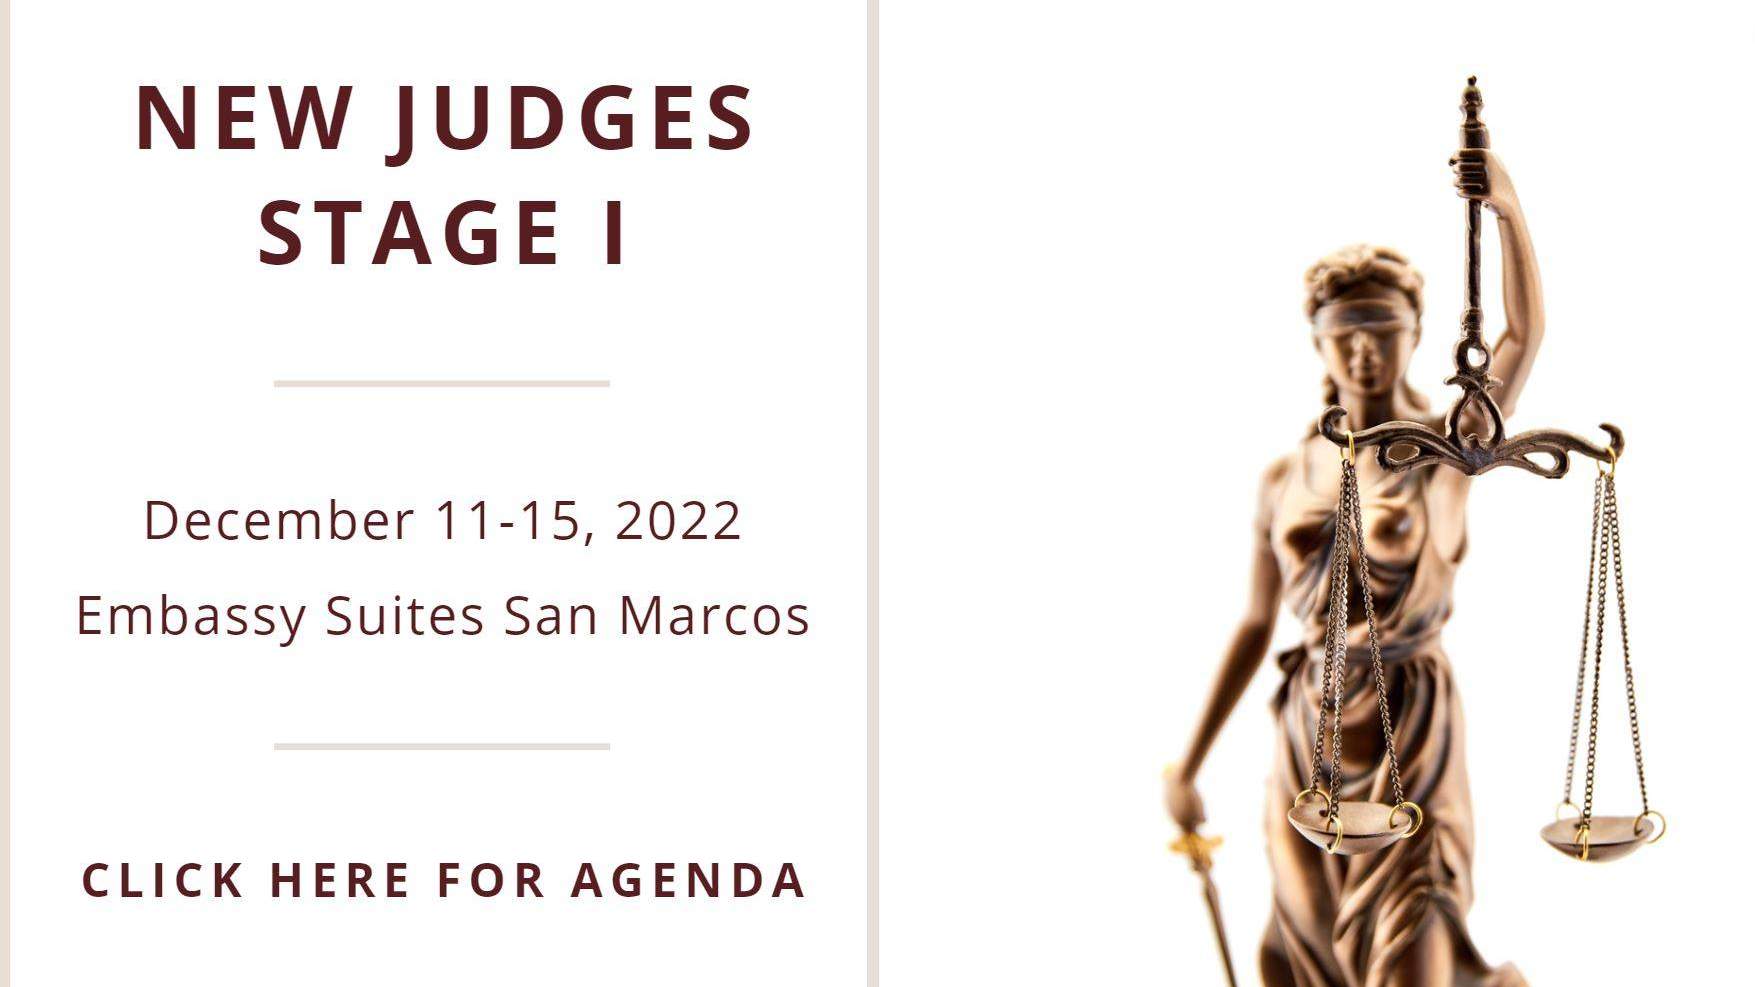 New Judges Stage I with lady justice